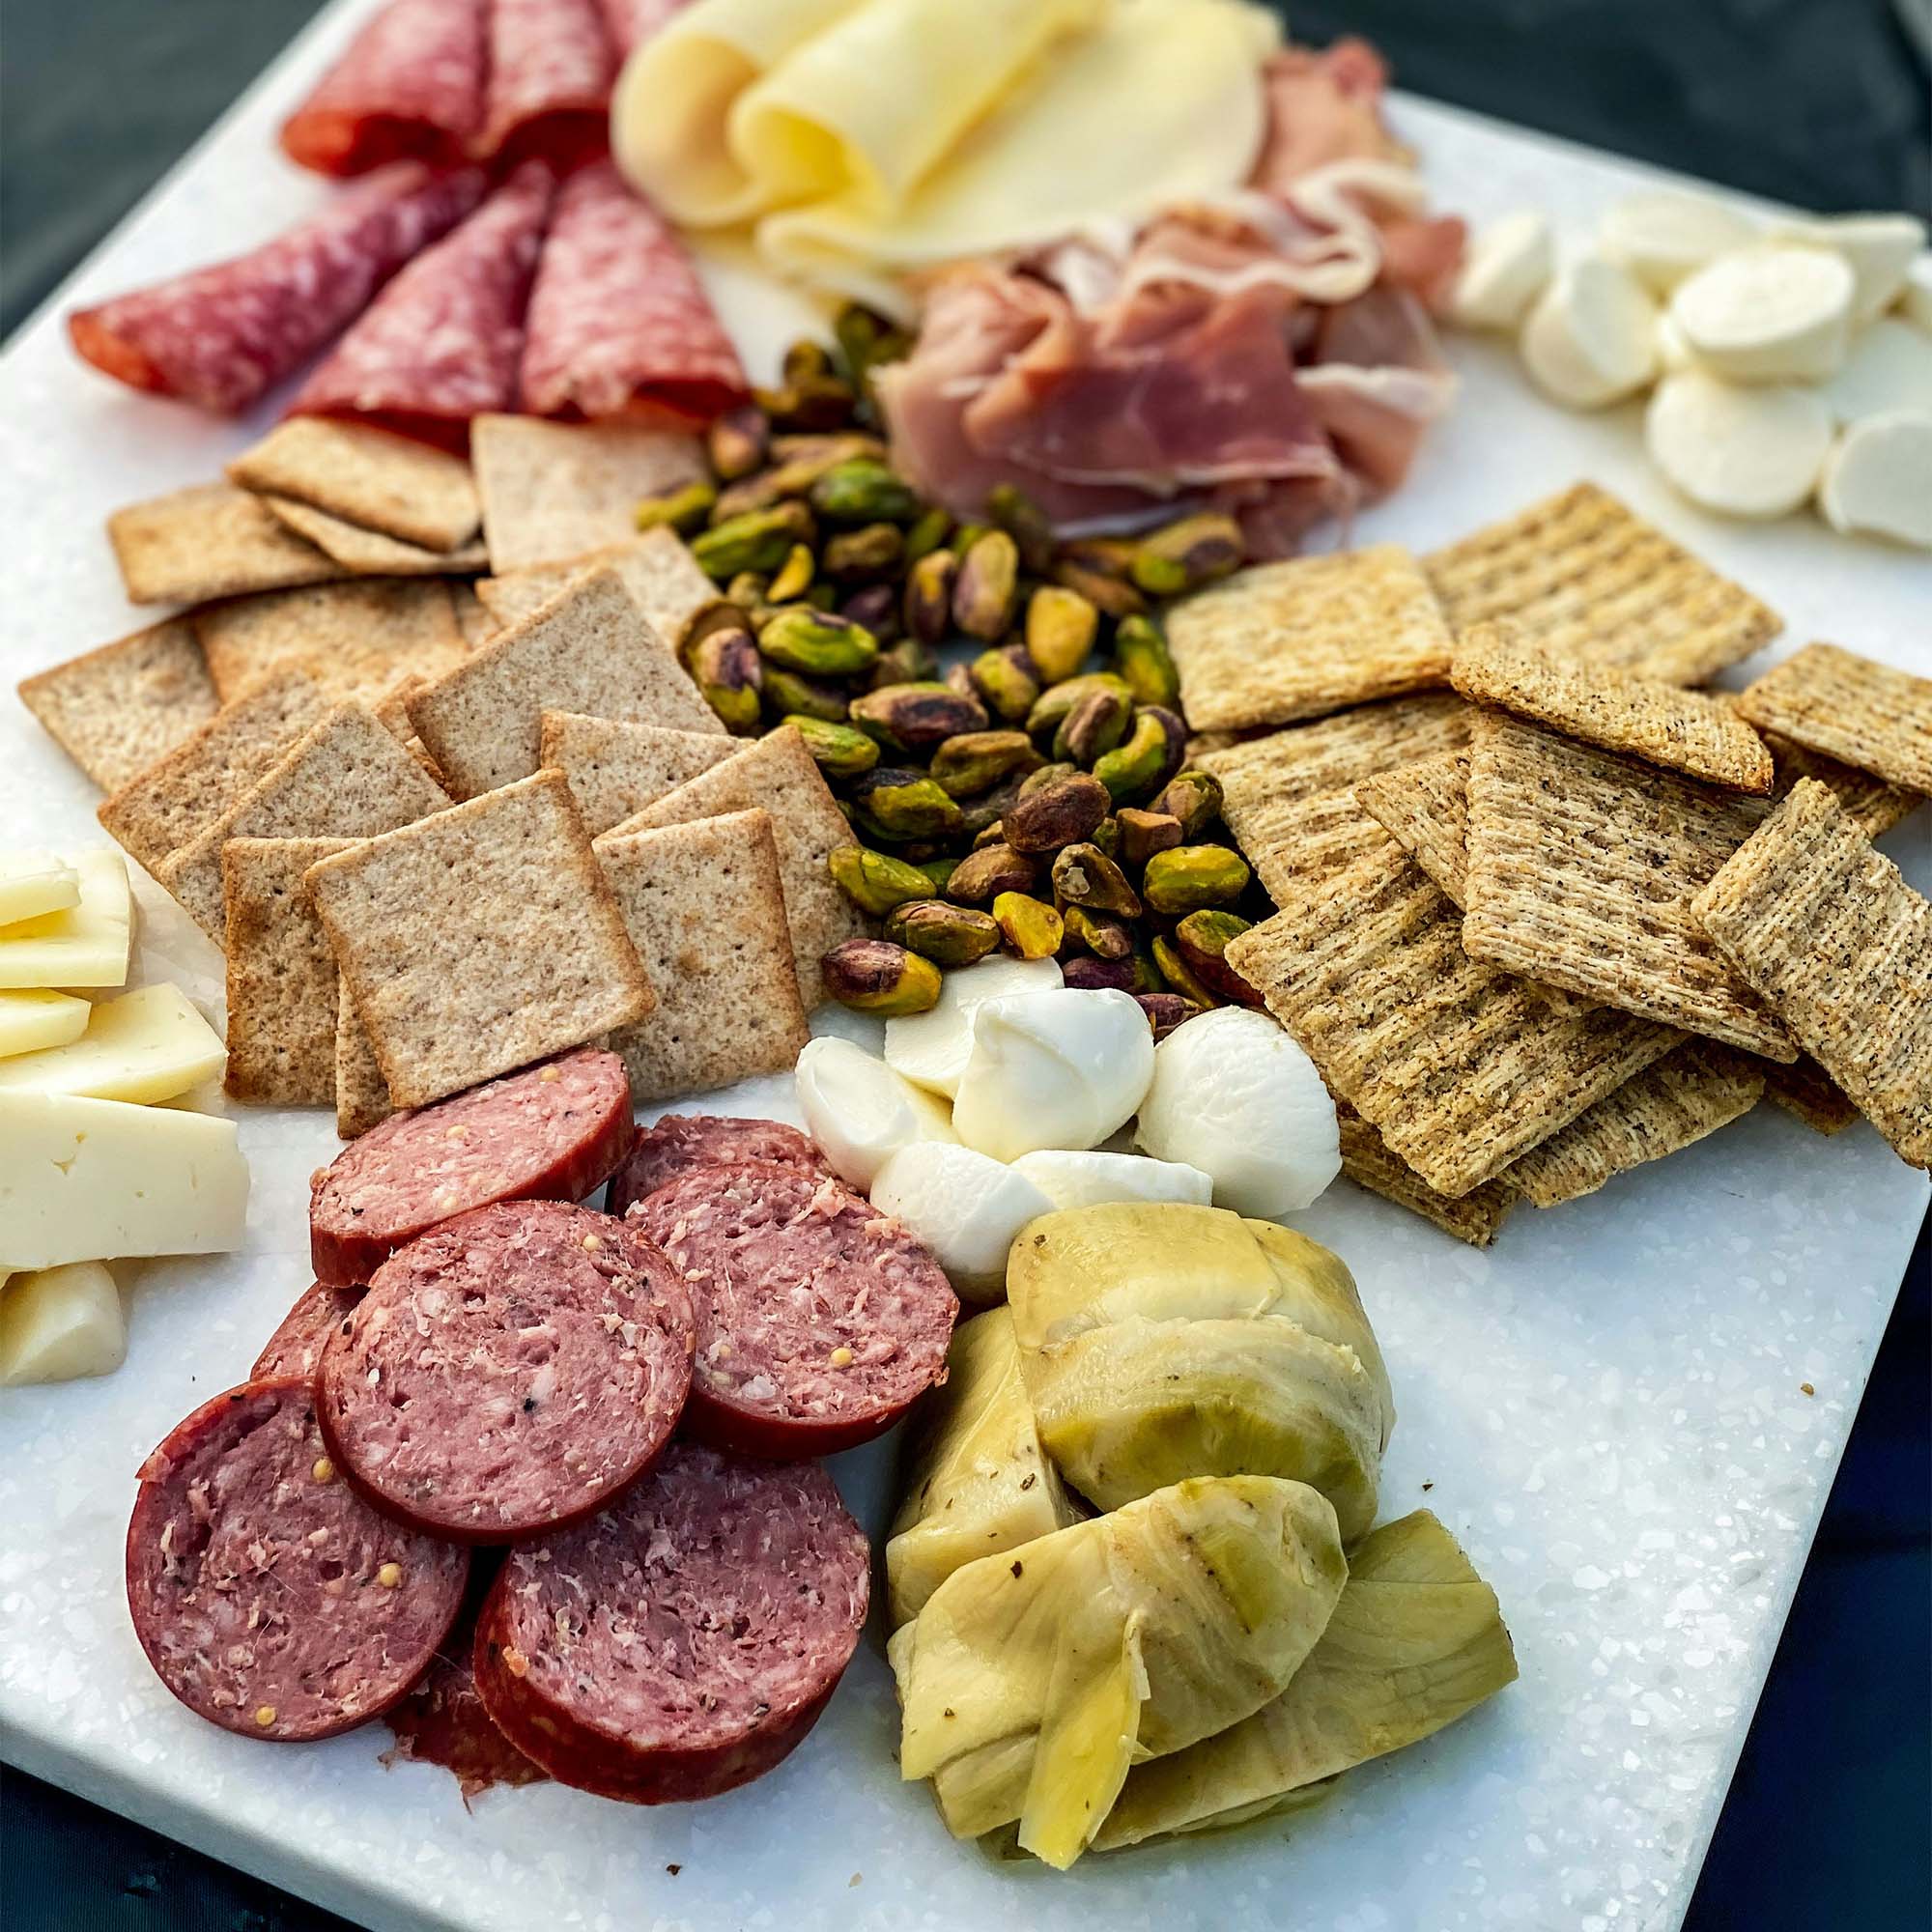 Photo: A full charcuterie board with meats, cheeses, and crackers on a stone plate